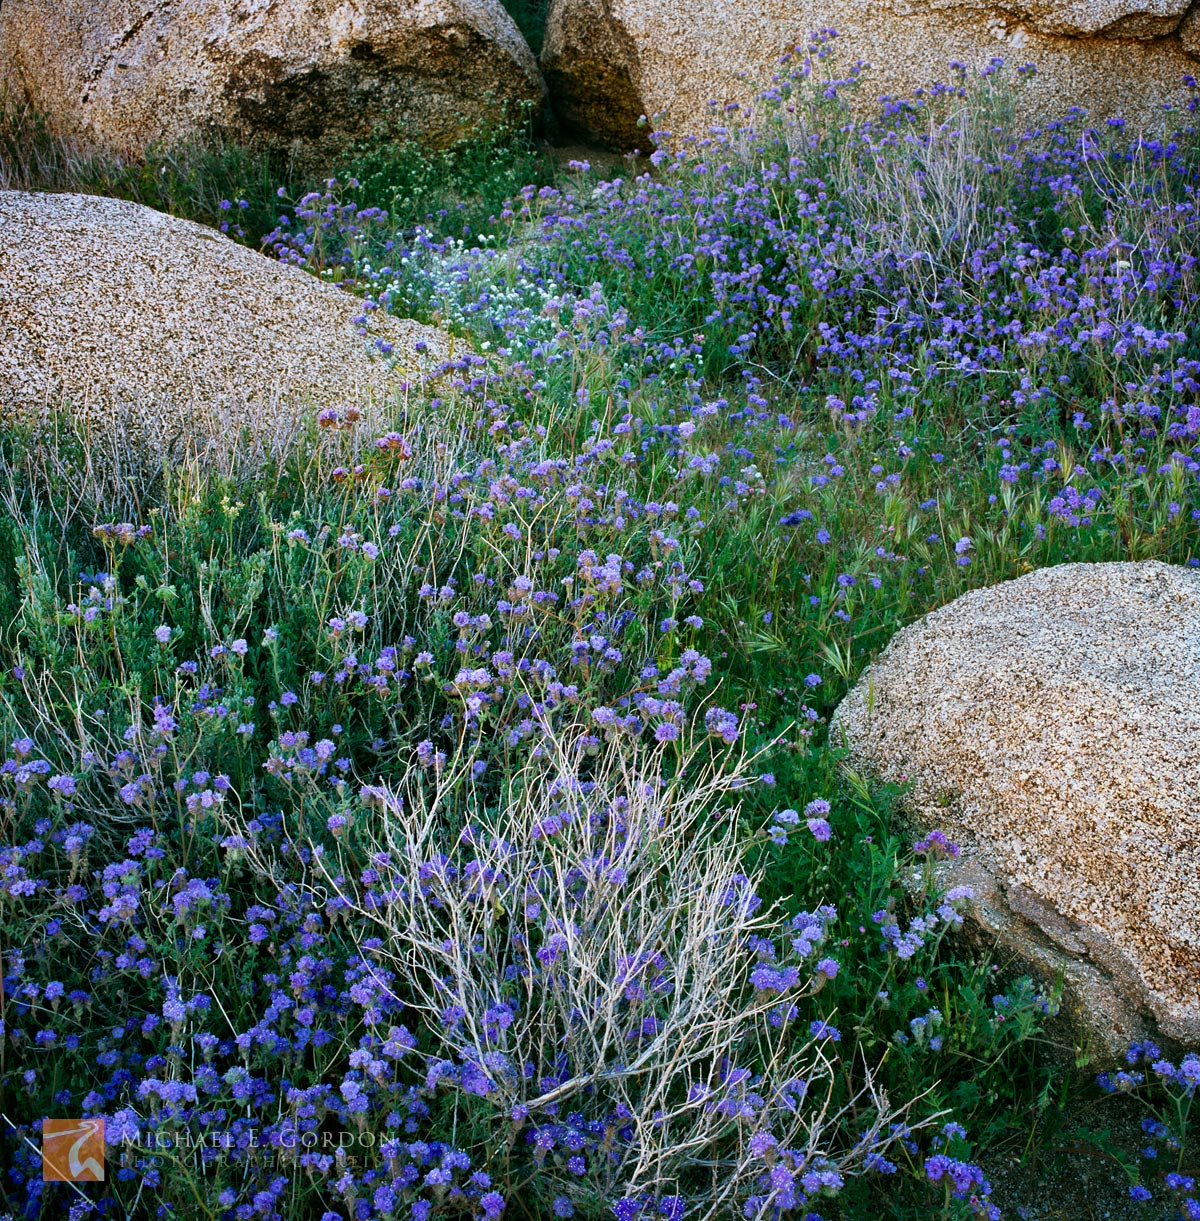 Distant Phacelia (Phacelia distans) wildflowers woven among beautiful granite boulders. Logos and watermarks are not found on...